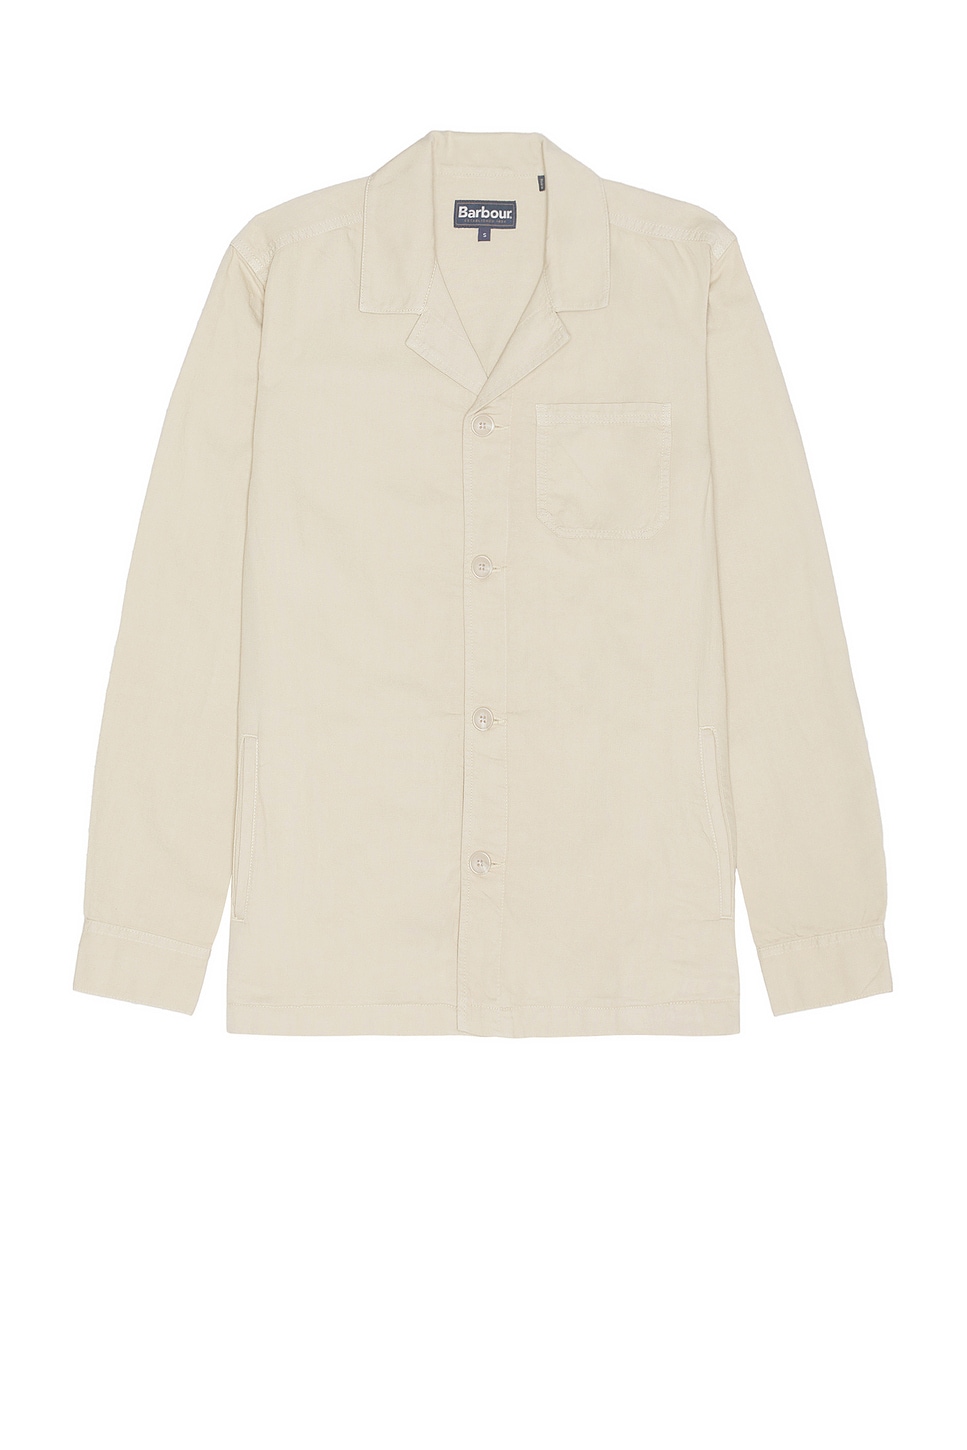 Image 1 of Barbour Melonby Overshirt in Mist